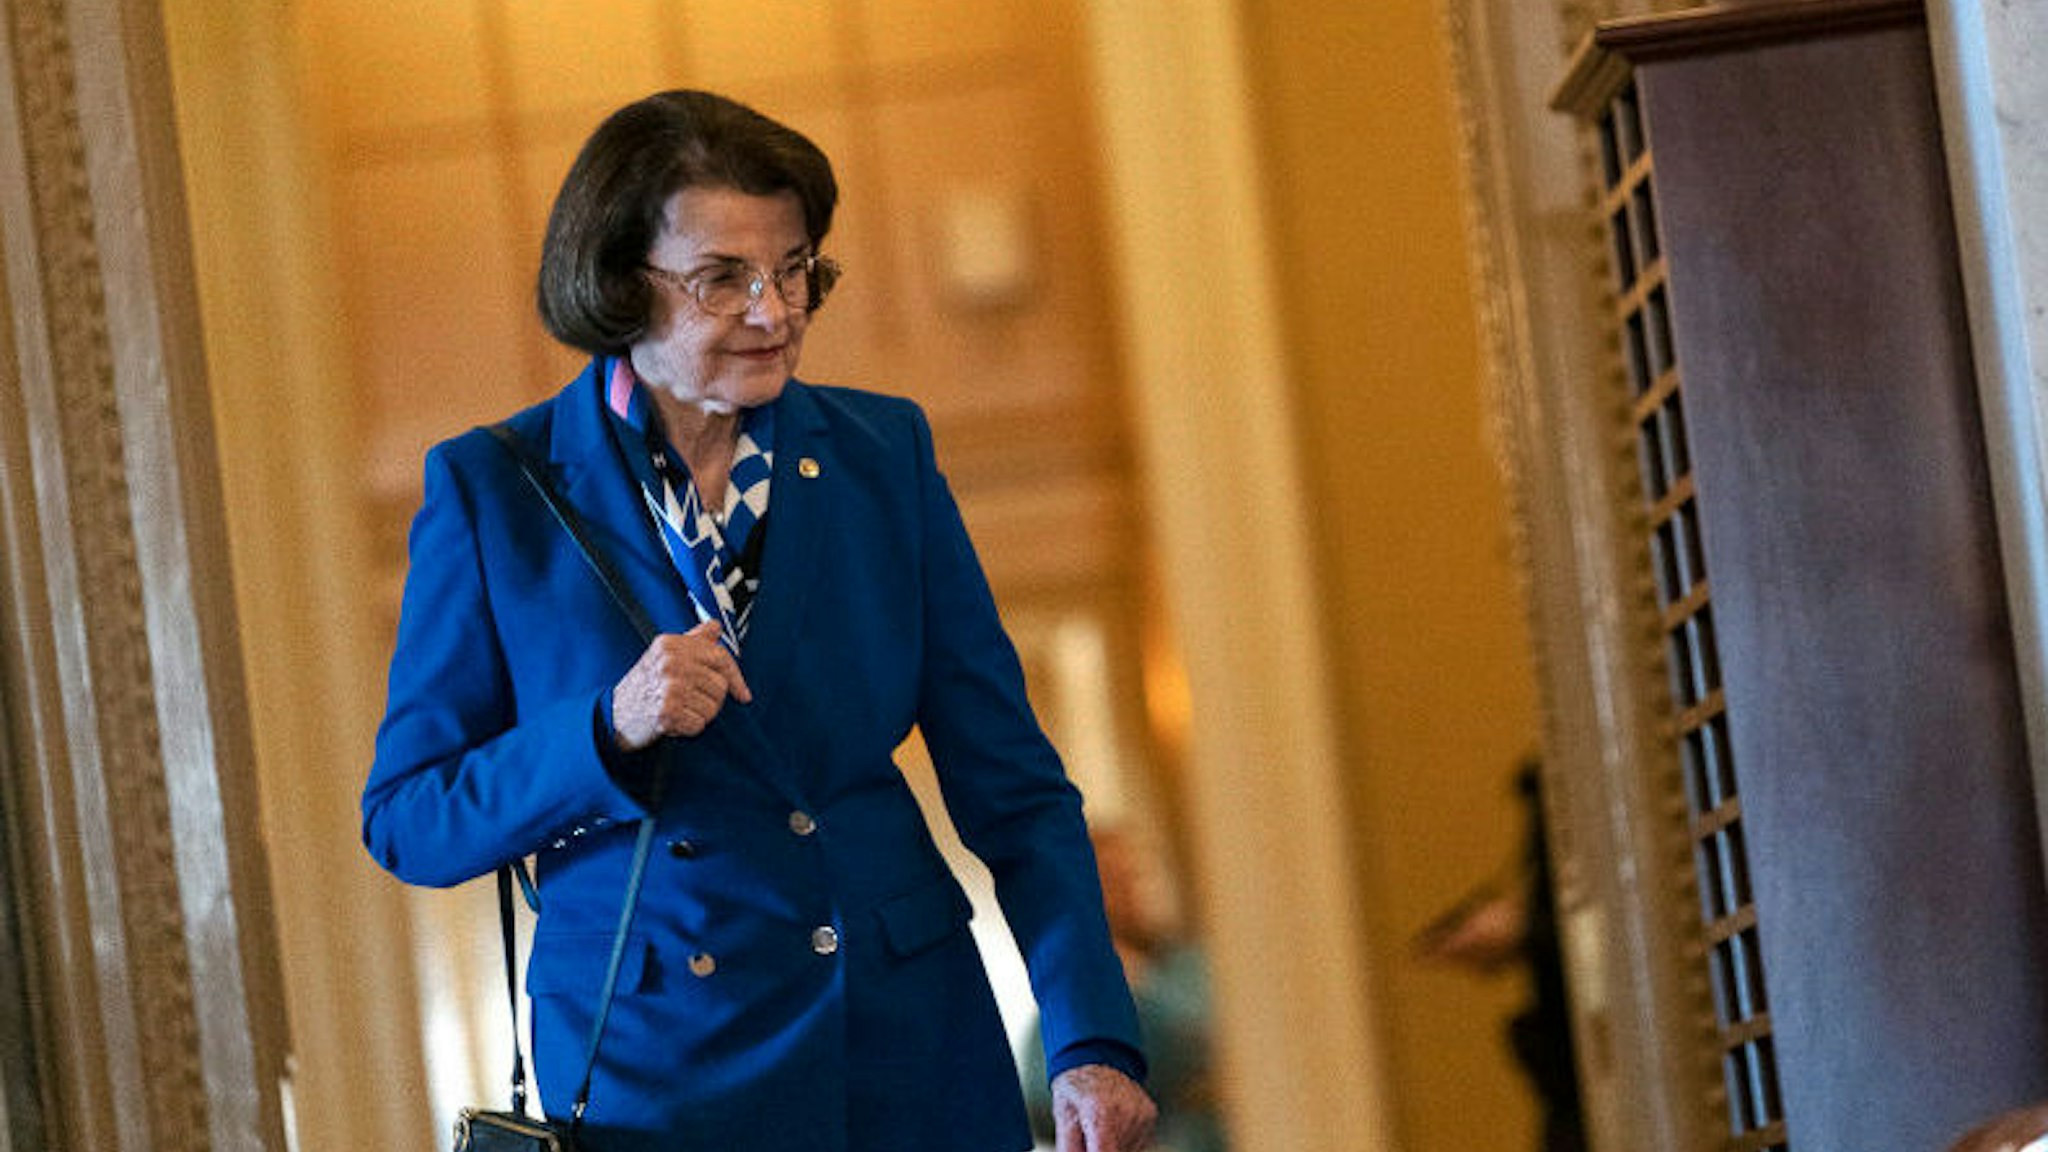 U.S. SenatorDianne Feinstein (D-CA) enters the Senate chamber in the U.S. Capitol on February 3, 2020 in Washington D.C., United States. Closing arguments begin Monday after the Senate voted to block witnesses from appearing in the impeachment trial. The final vote is expected on Wednesday. (Photo by Alex Edelman/Getty Images)